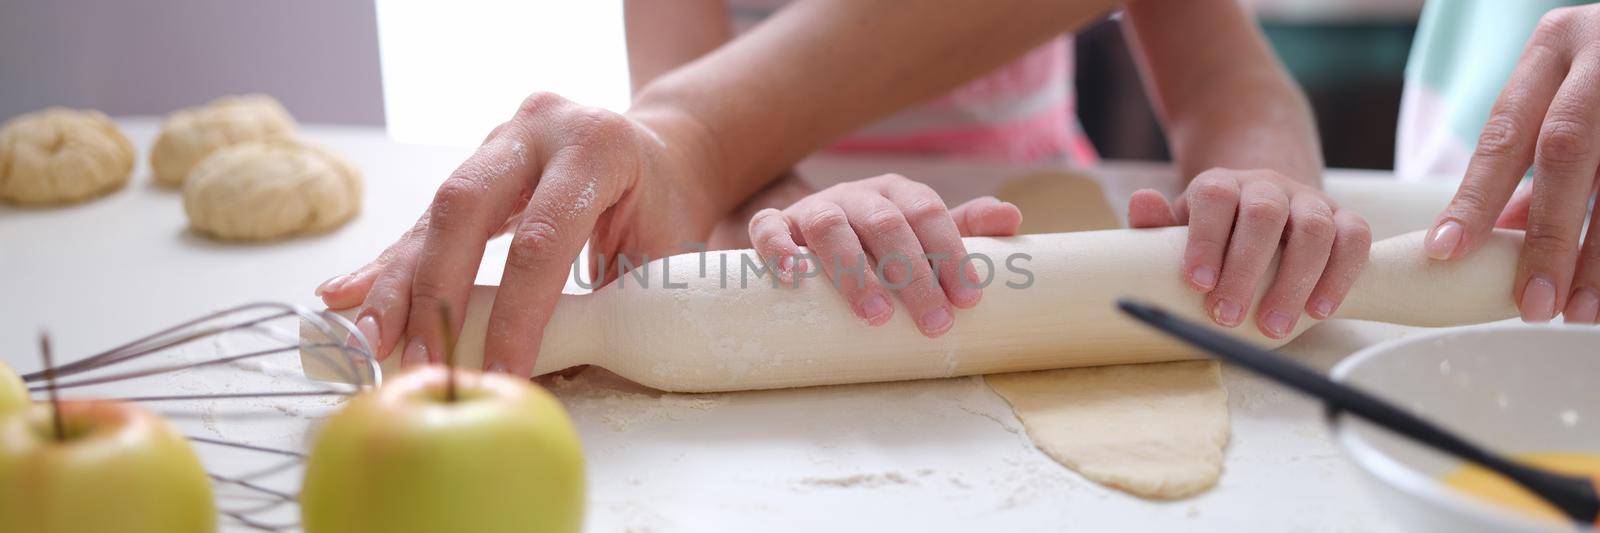 Adult and child roll out dough with rolling pin on table closeup by kuprevich